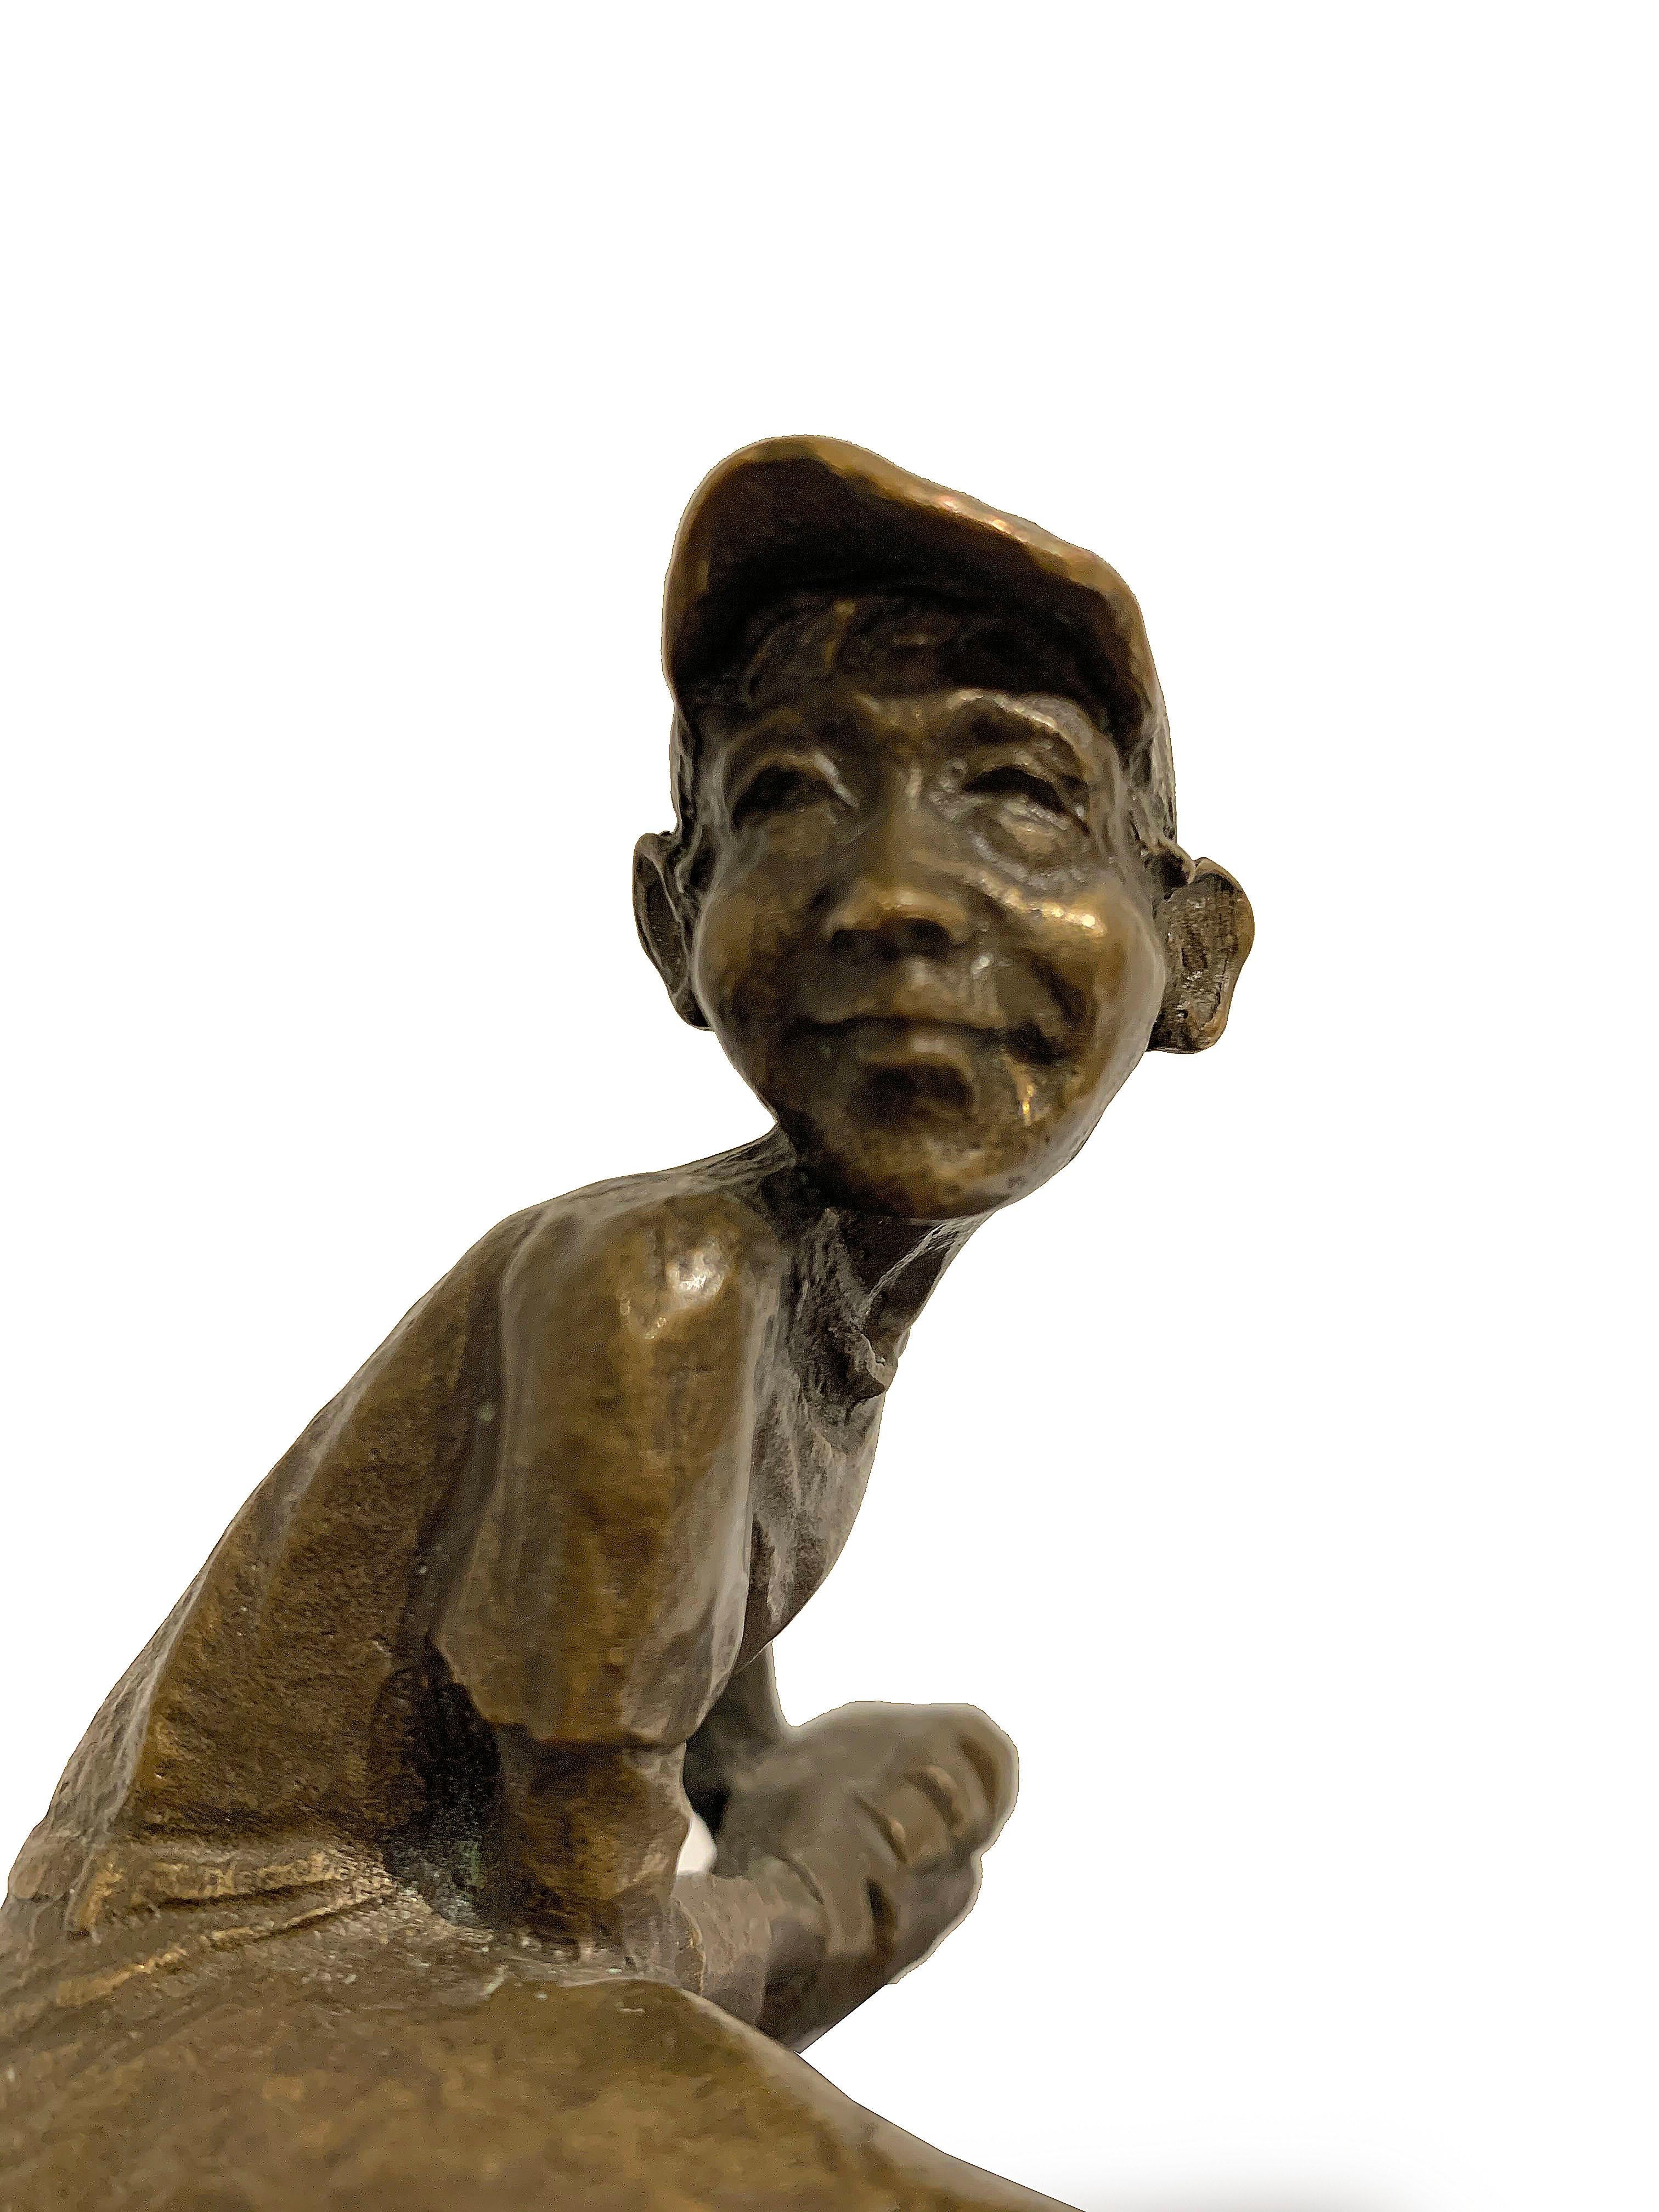 Nostalgia got the best of us when we saw this sculpture of a pitcher ready to strike. He has all eyes on bases and sculptor Mark Hopkins has represented him so well, down to the stare. A limited edition sculpture 508/2500. Signed, 1989.